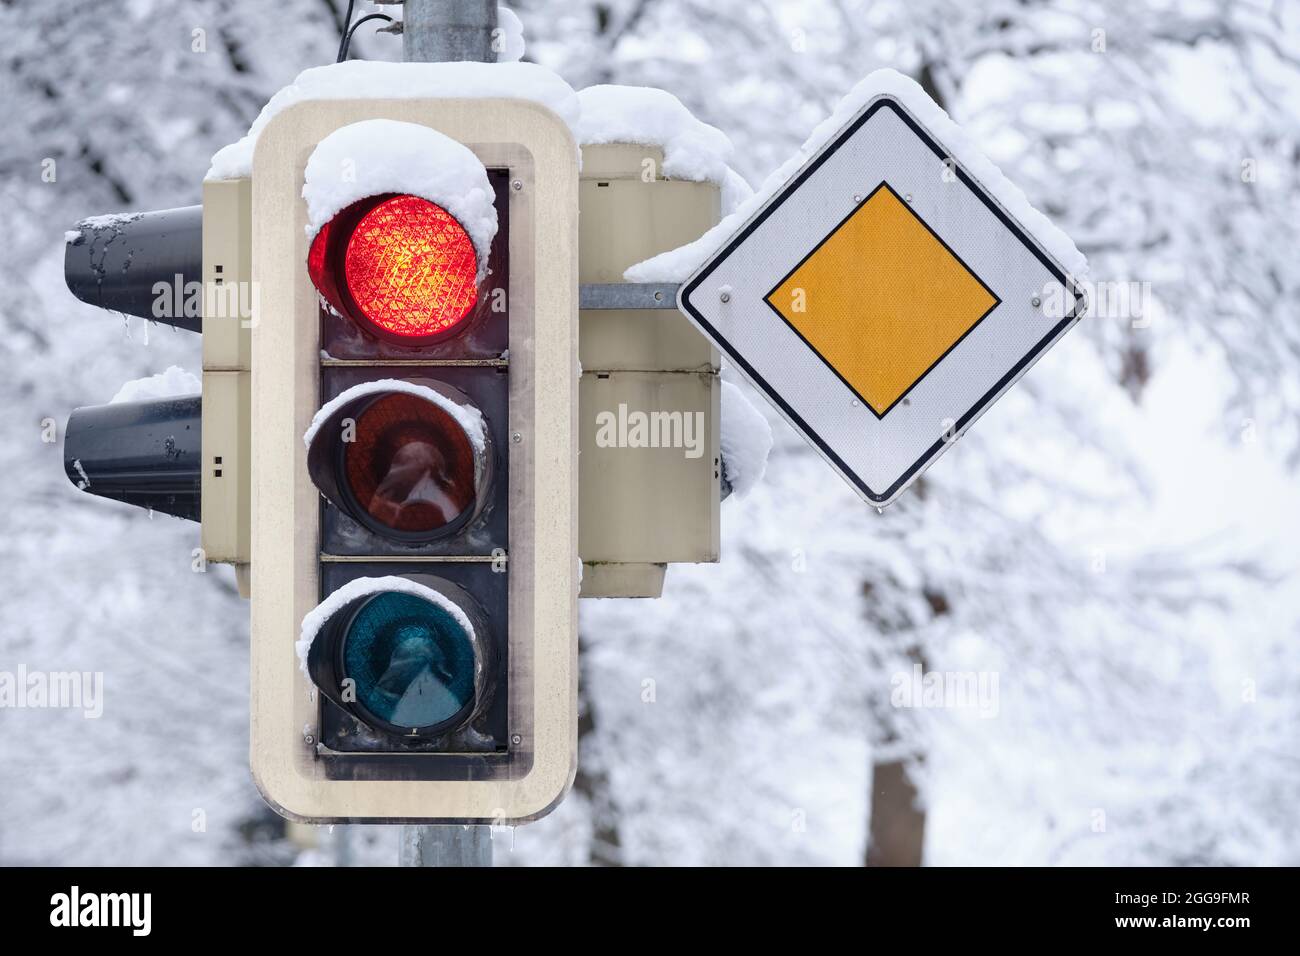 Closeup of traffic lights showing red color to the traffic on the street on a frosty winter day. Seen in Germany in February Stock Photo